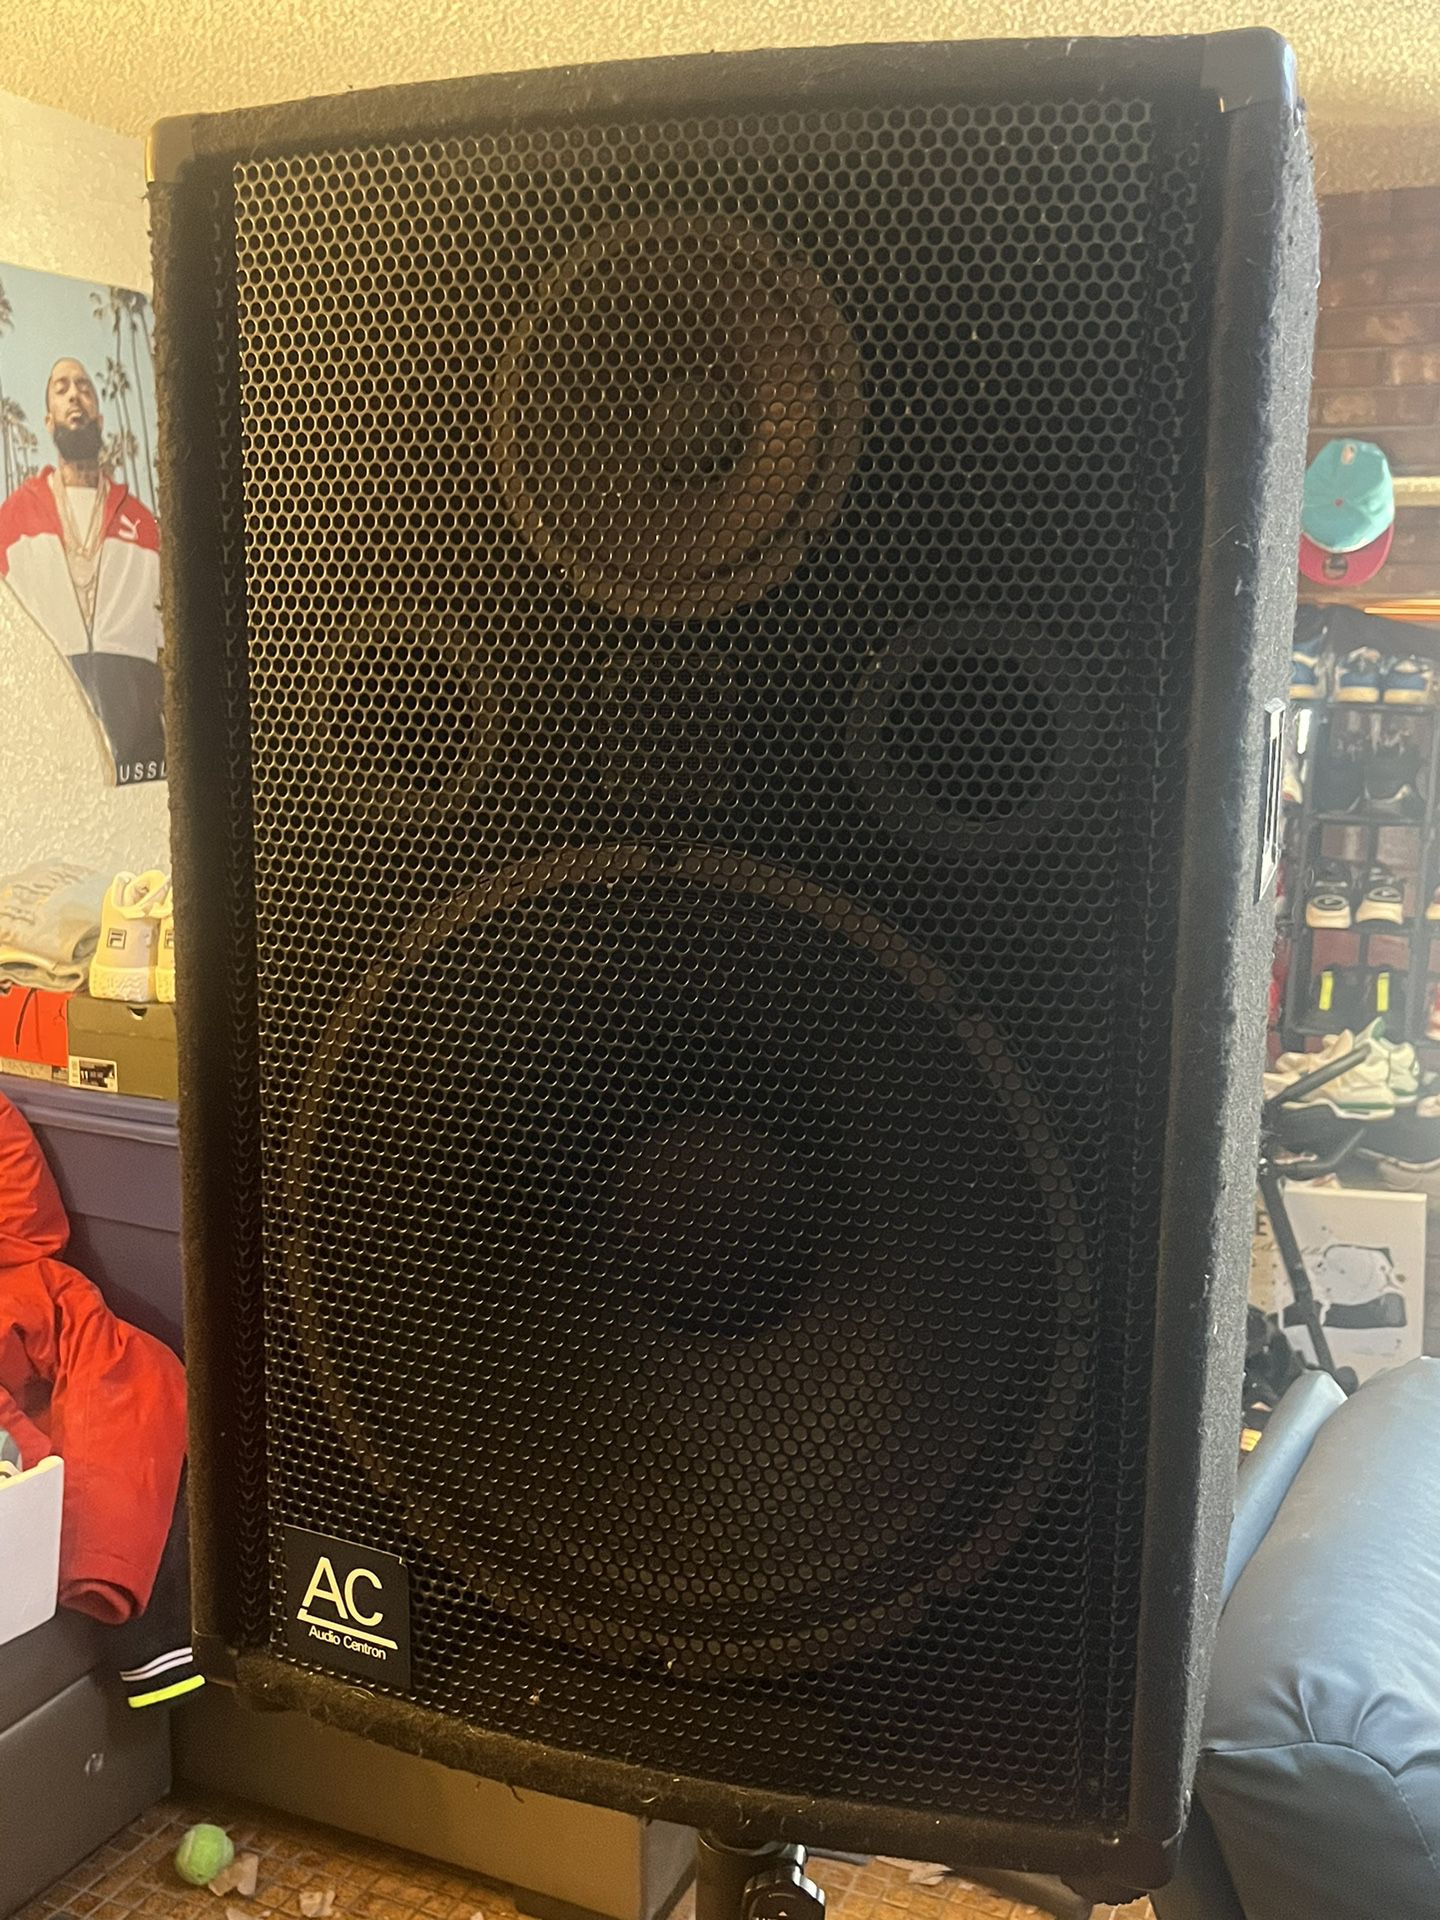 2 Audio Centron 150w  Speakers And Stereo Power Amplifier 